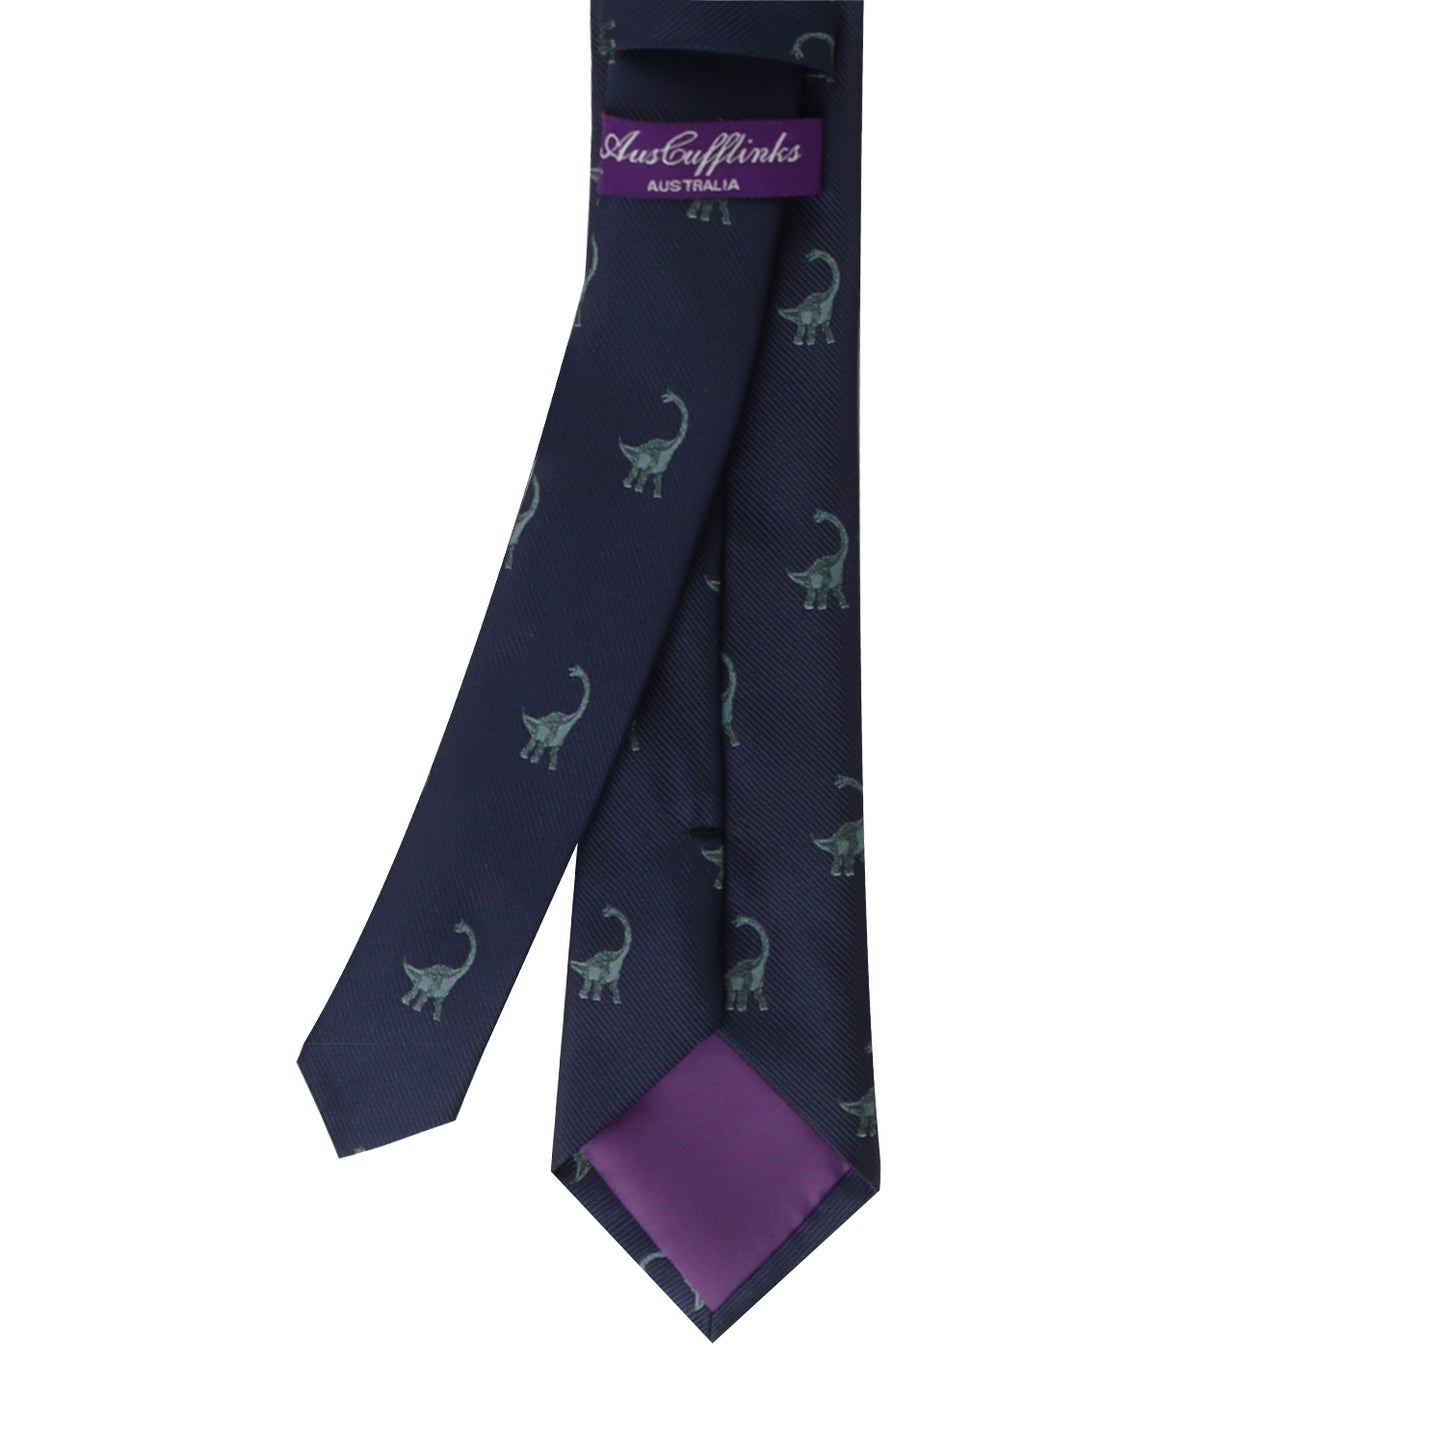 A Brontosaurus Skinny Tie with a dinosaur print on it, bringing a touch of dino elegance to your look.